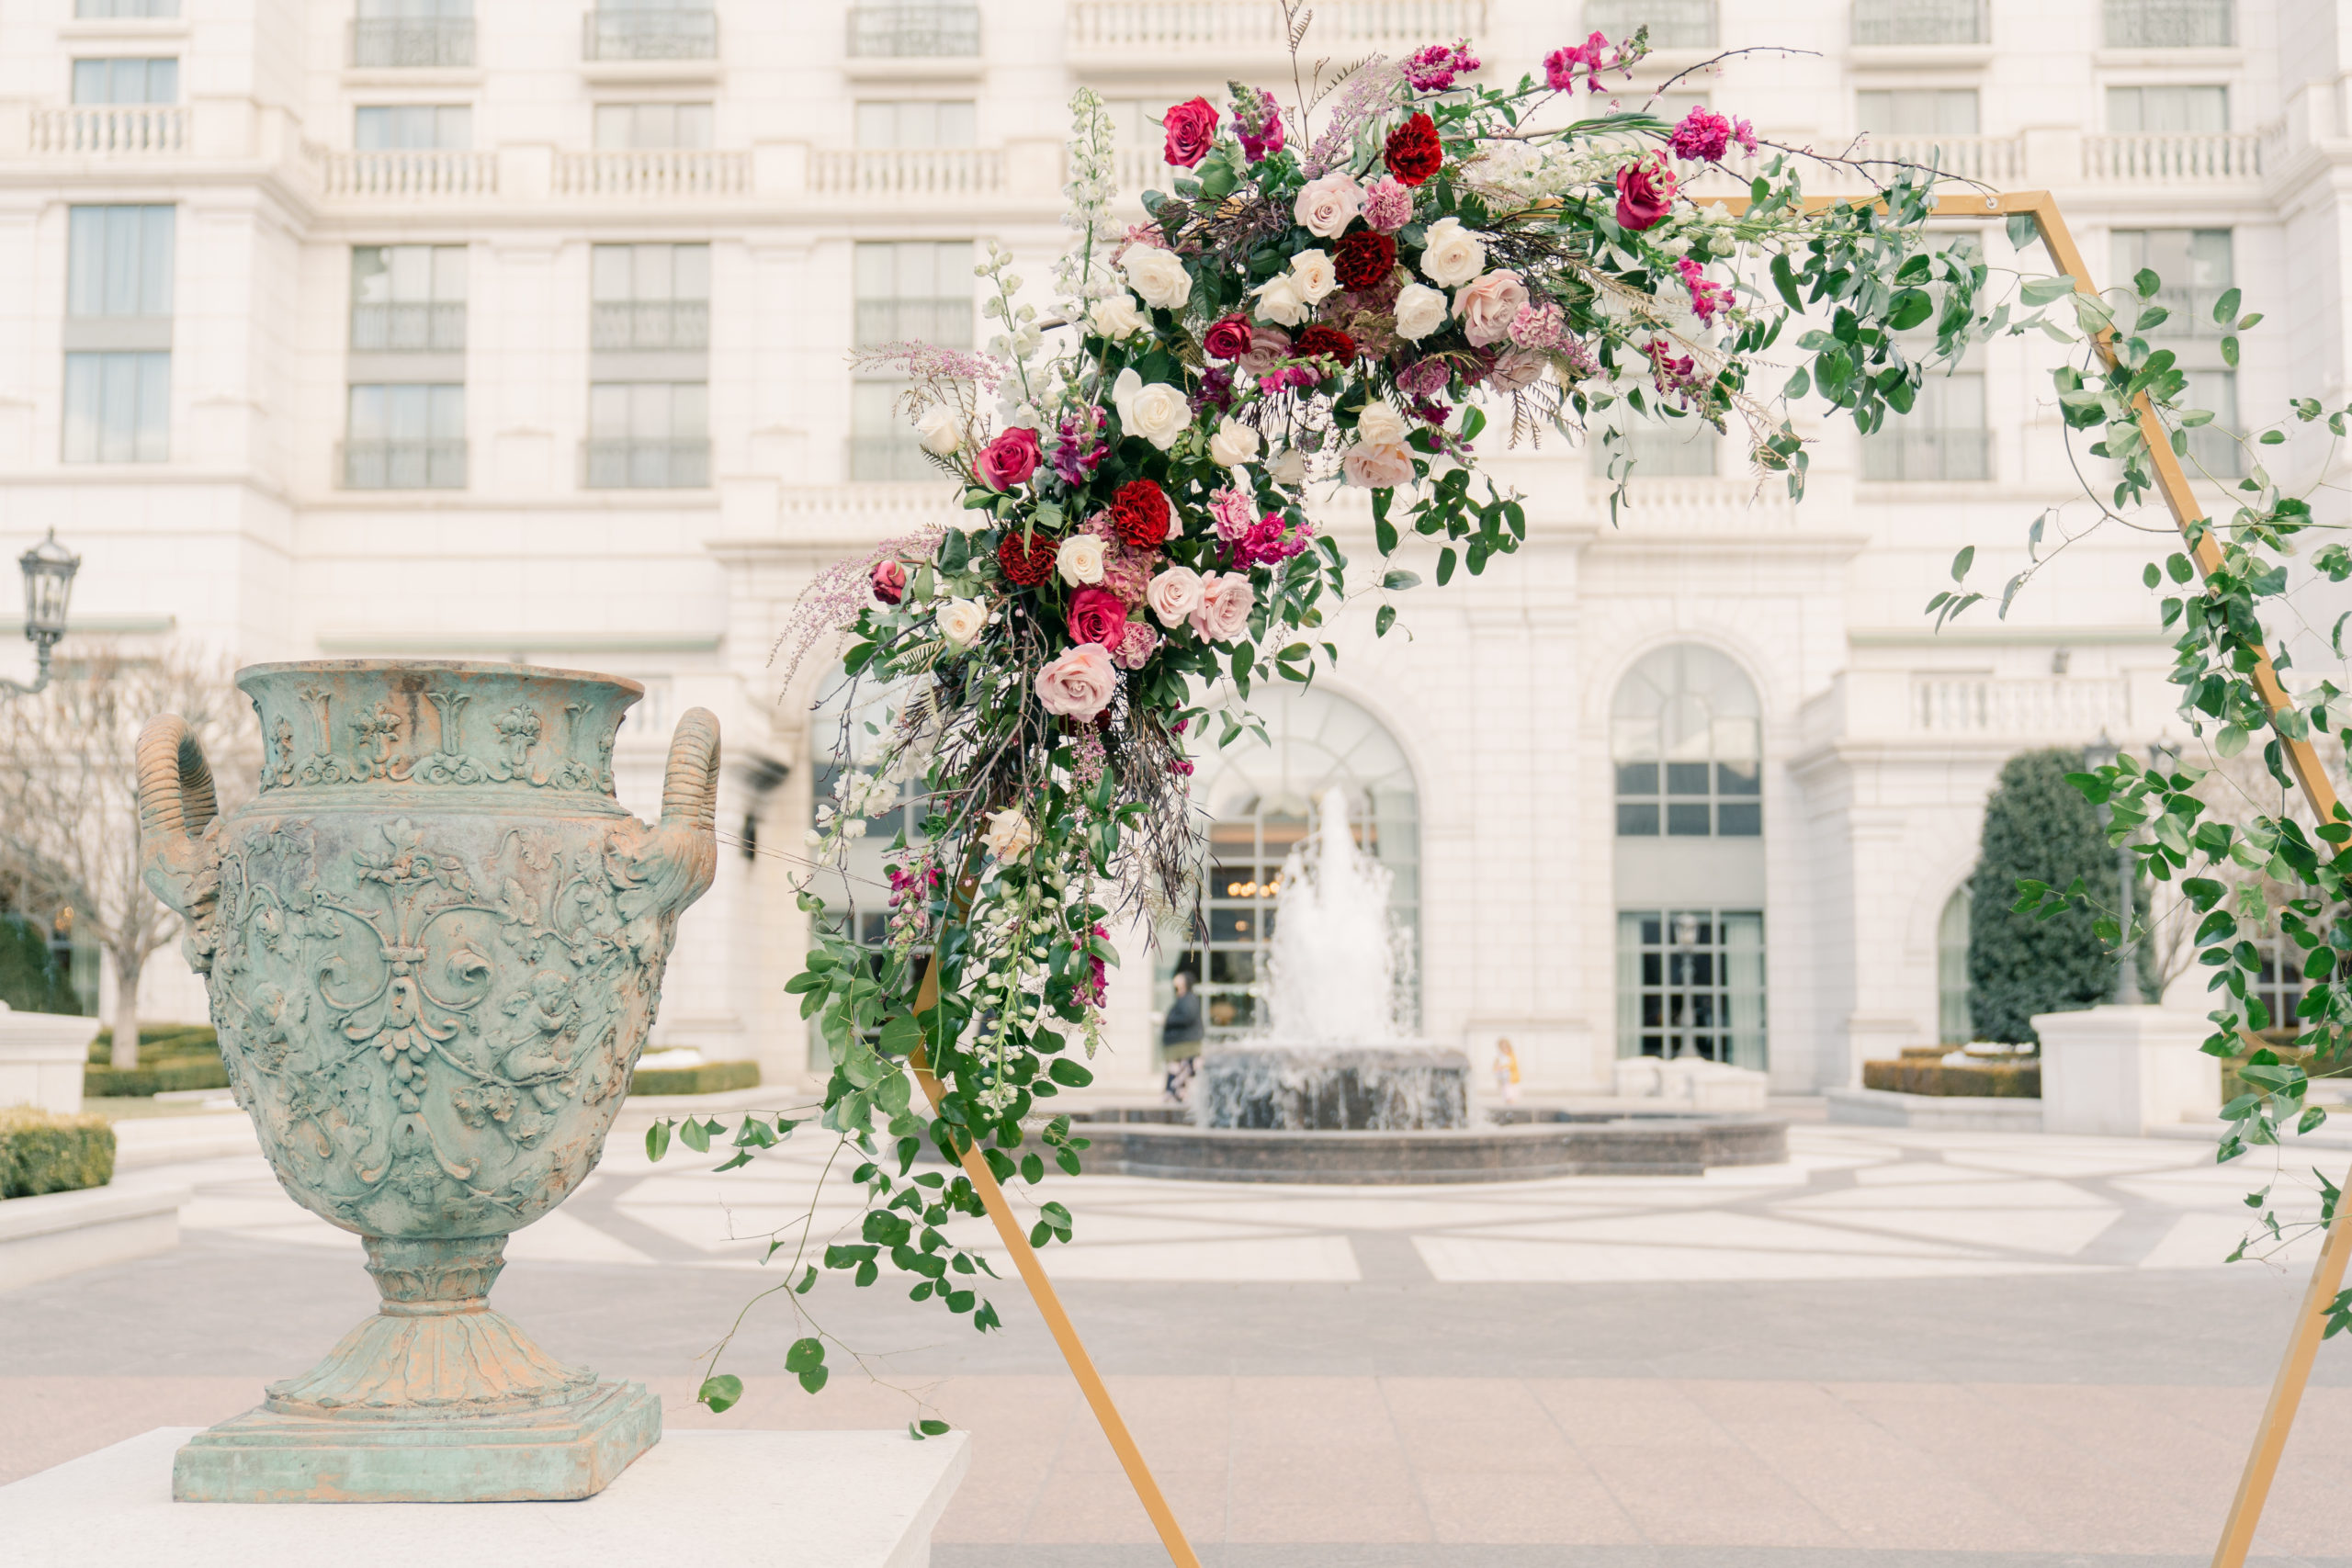 Florals on a metal frame in the center Courtyard for a Wedding at The Grand America Hotel.